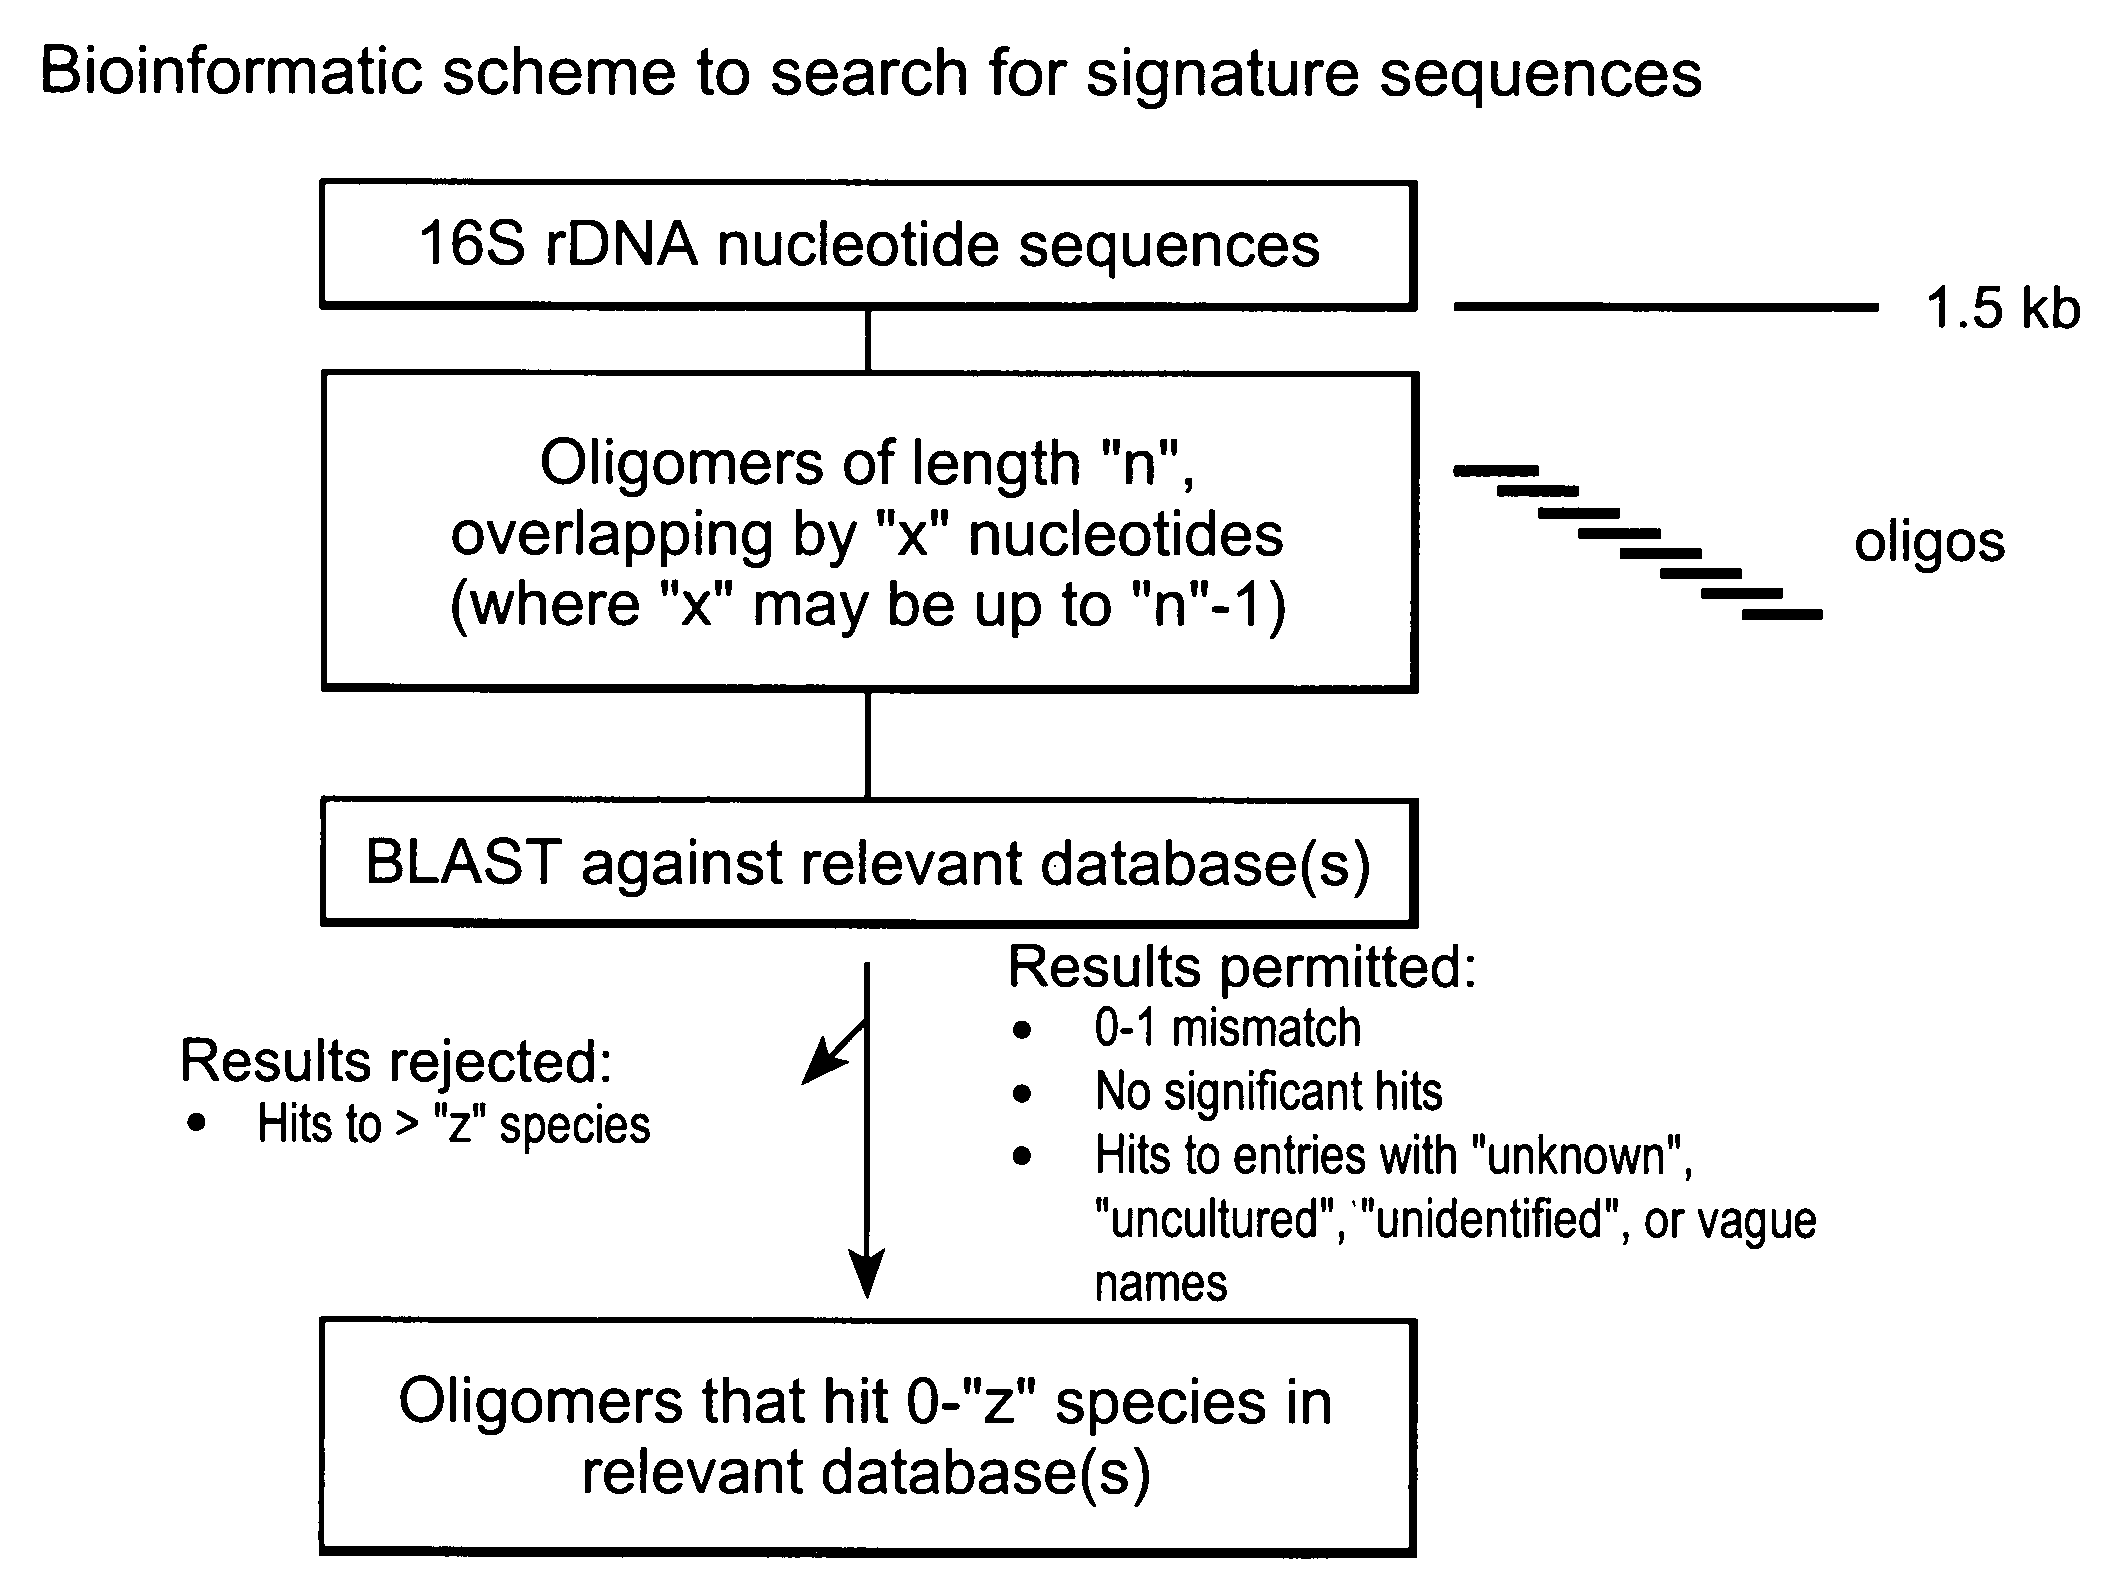 Genus, group, species and/or strain specific 16S rDNA sequences